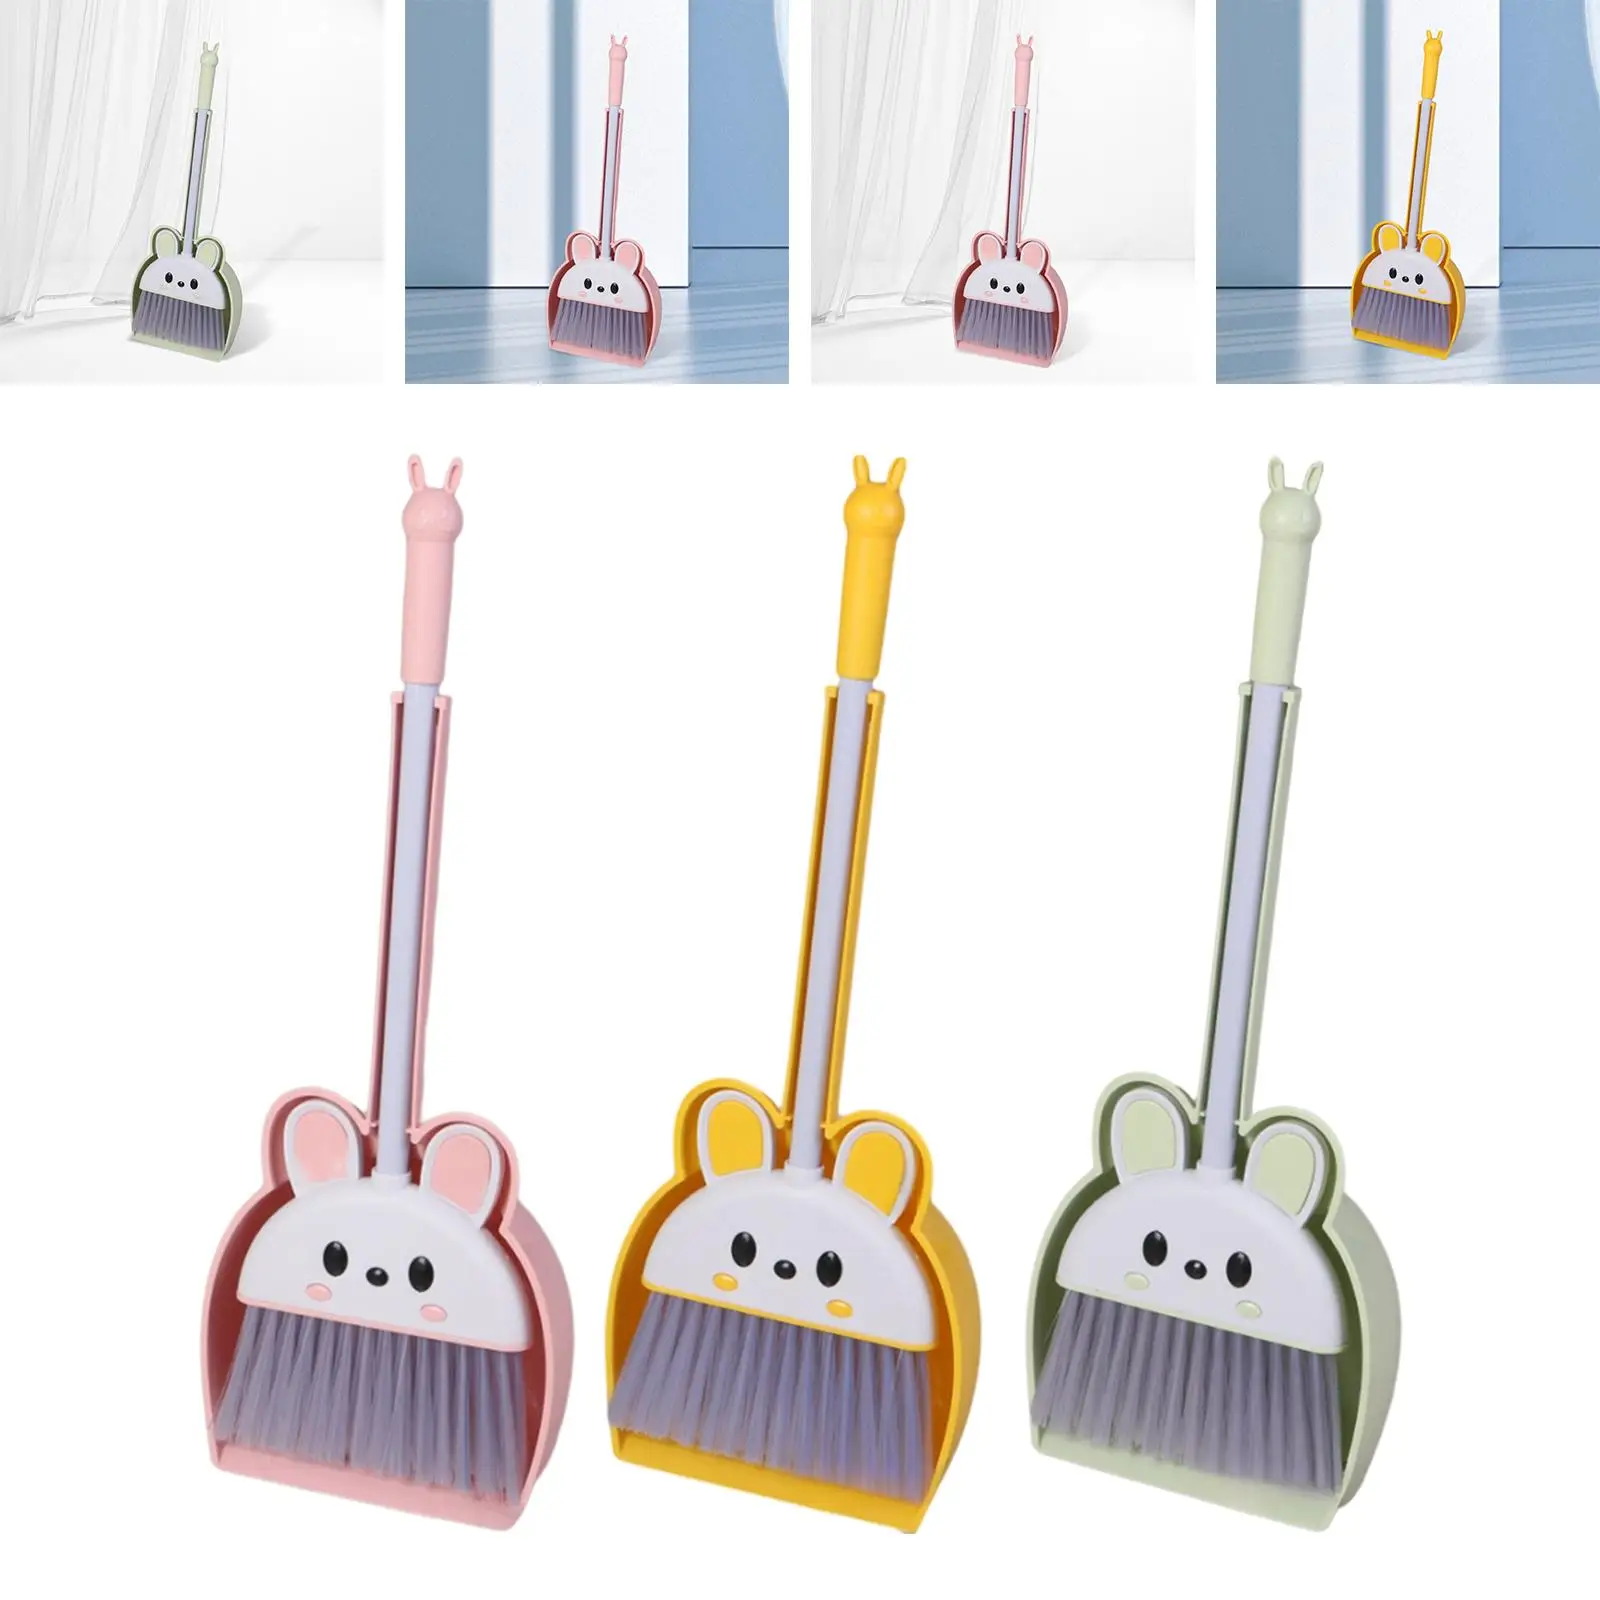 Housekeeping Pretend Play Cleaning Tools Holiday Gifts Role Playing Mini Broom with Dustpan for Kids for Kindergarten Age 3-6